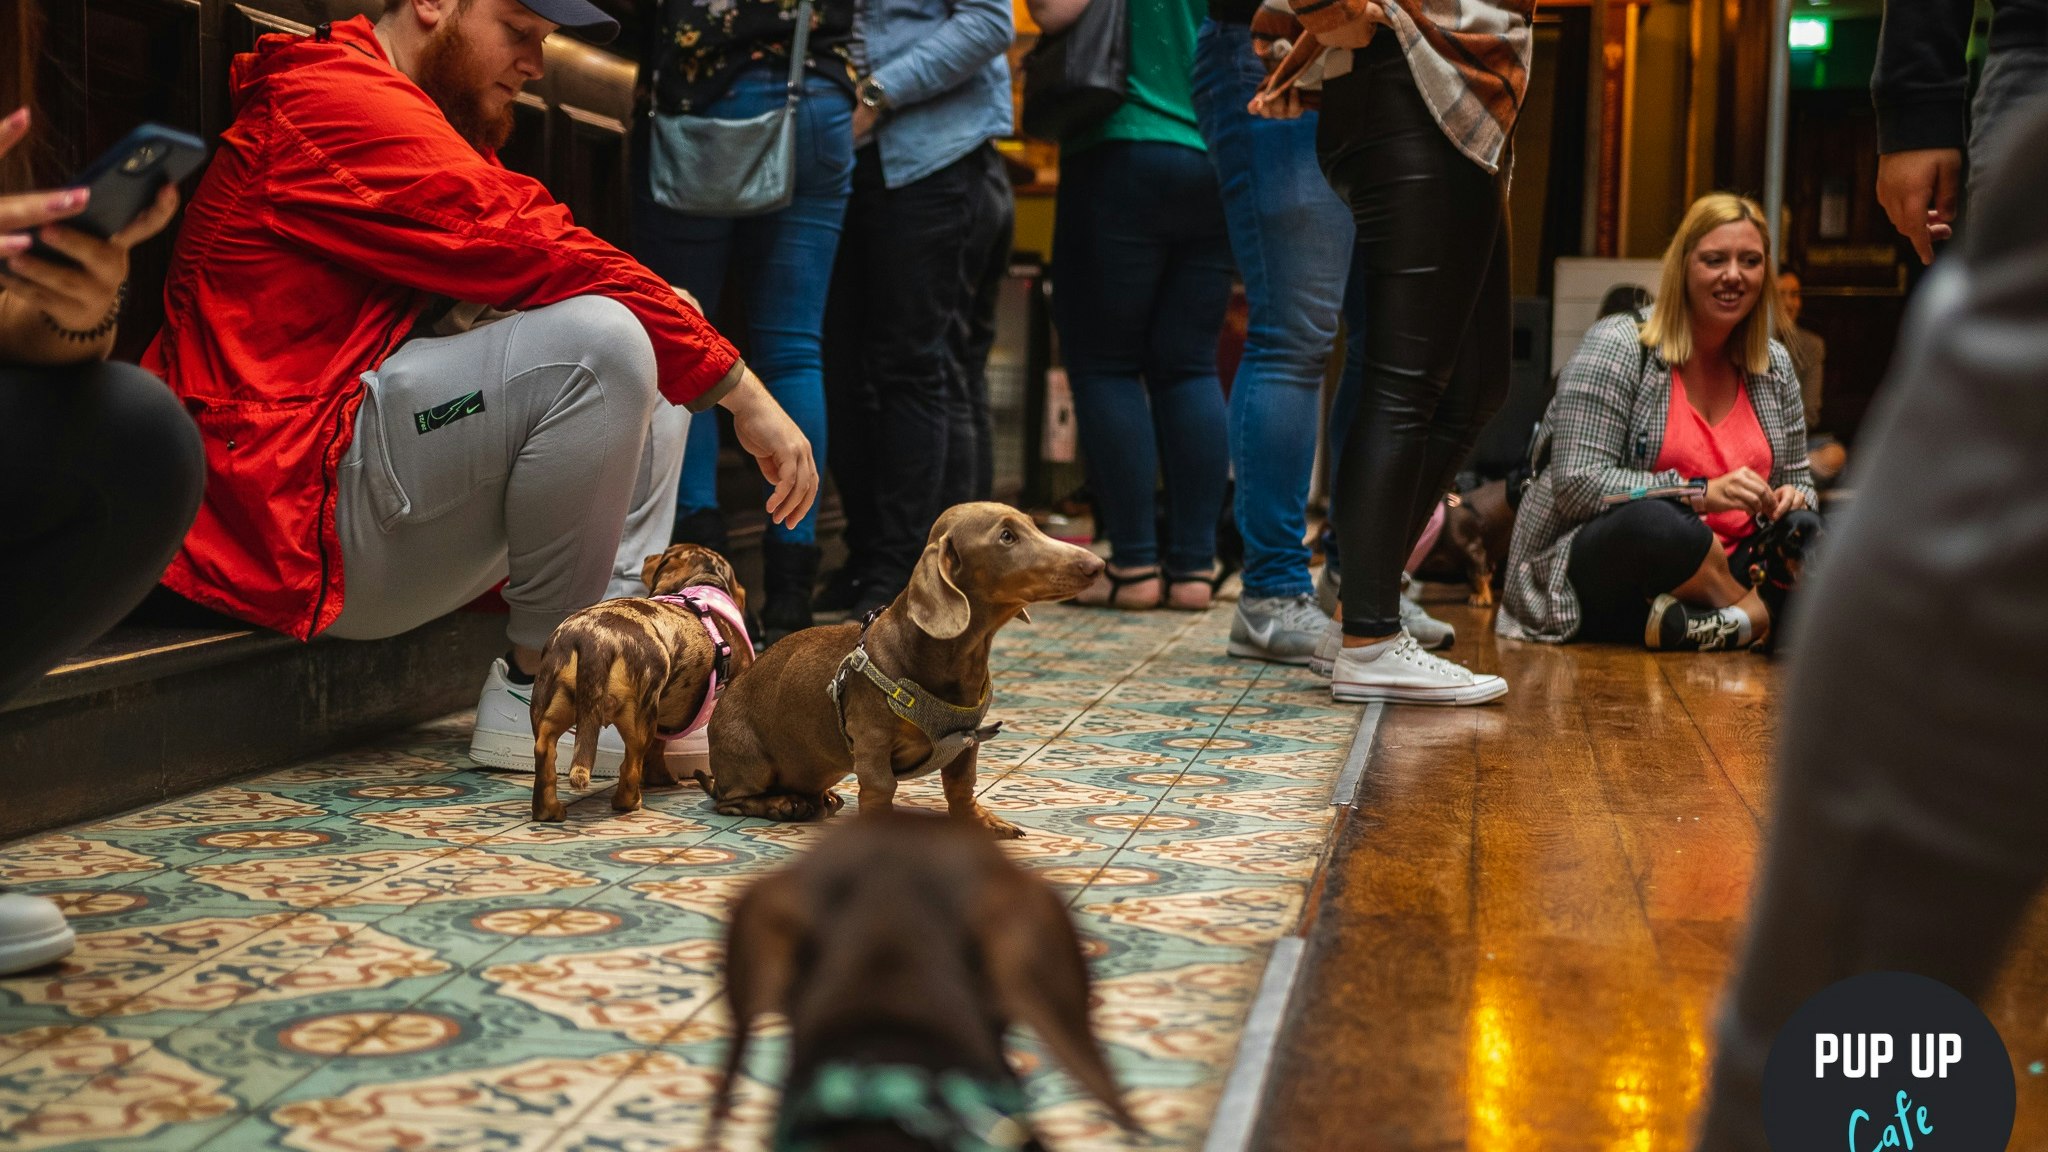 Dachshund Pup Up Cafe – Wycombe